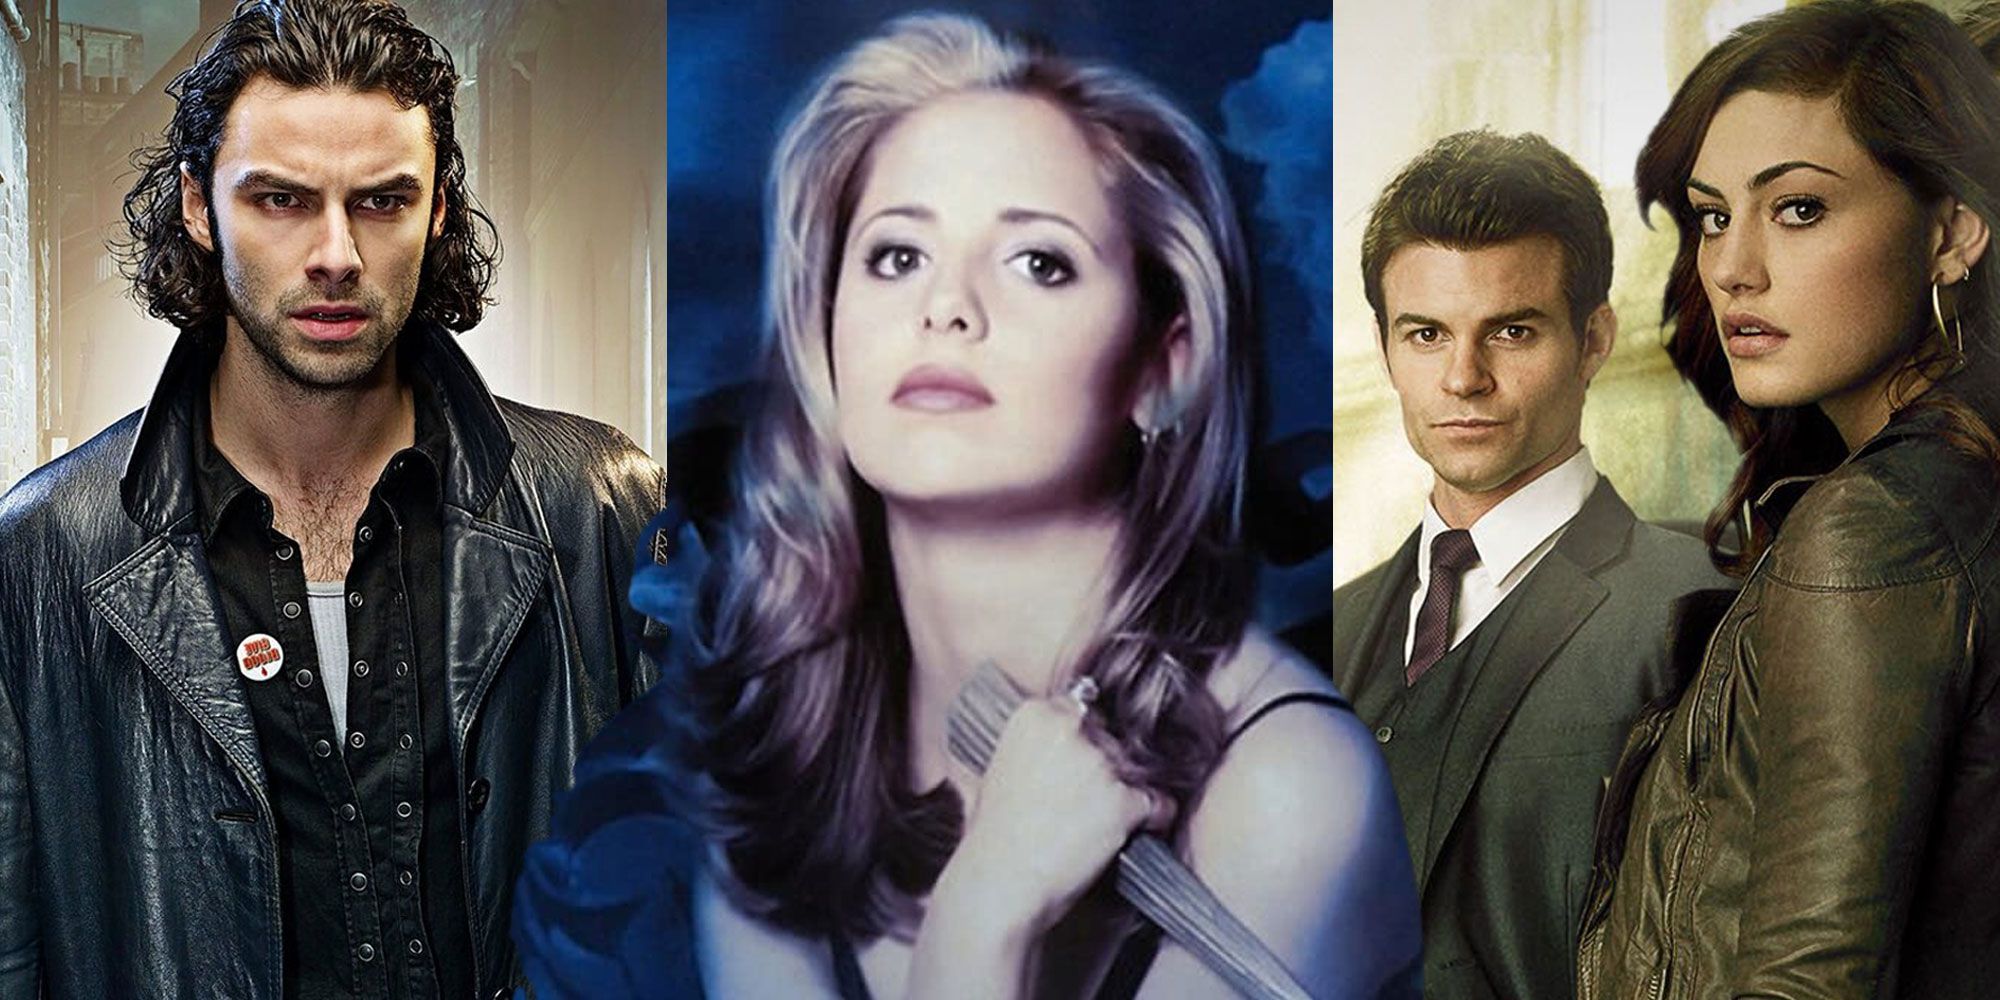 The 10 Best Vampire TV Shows, According To Ranker